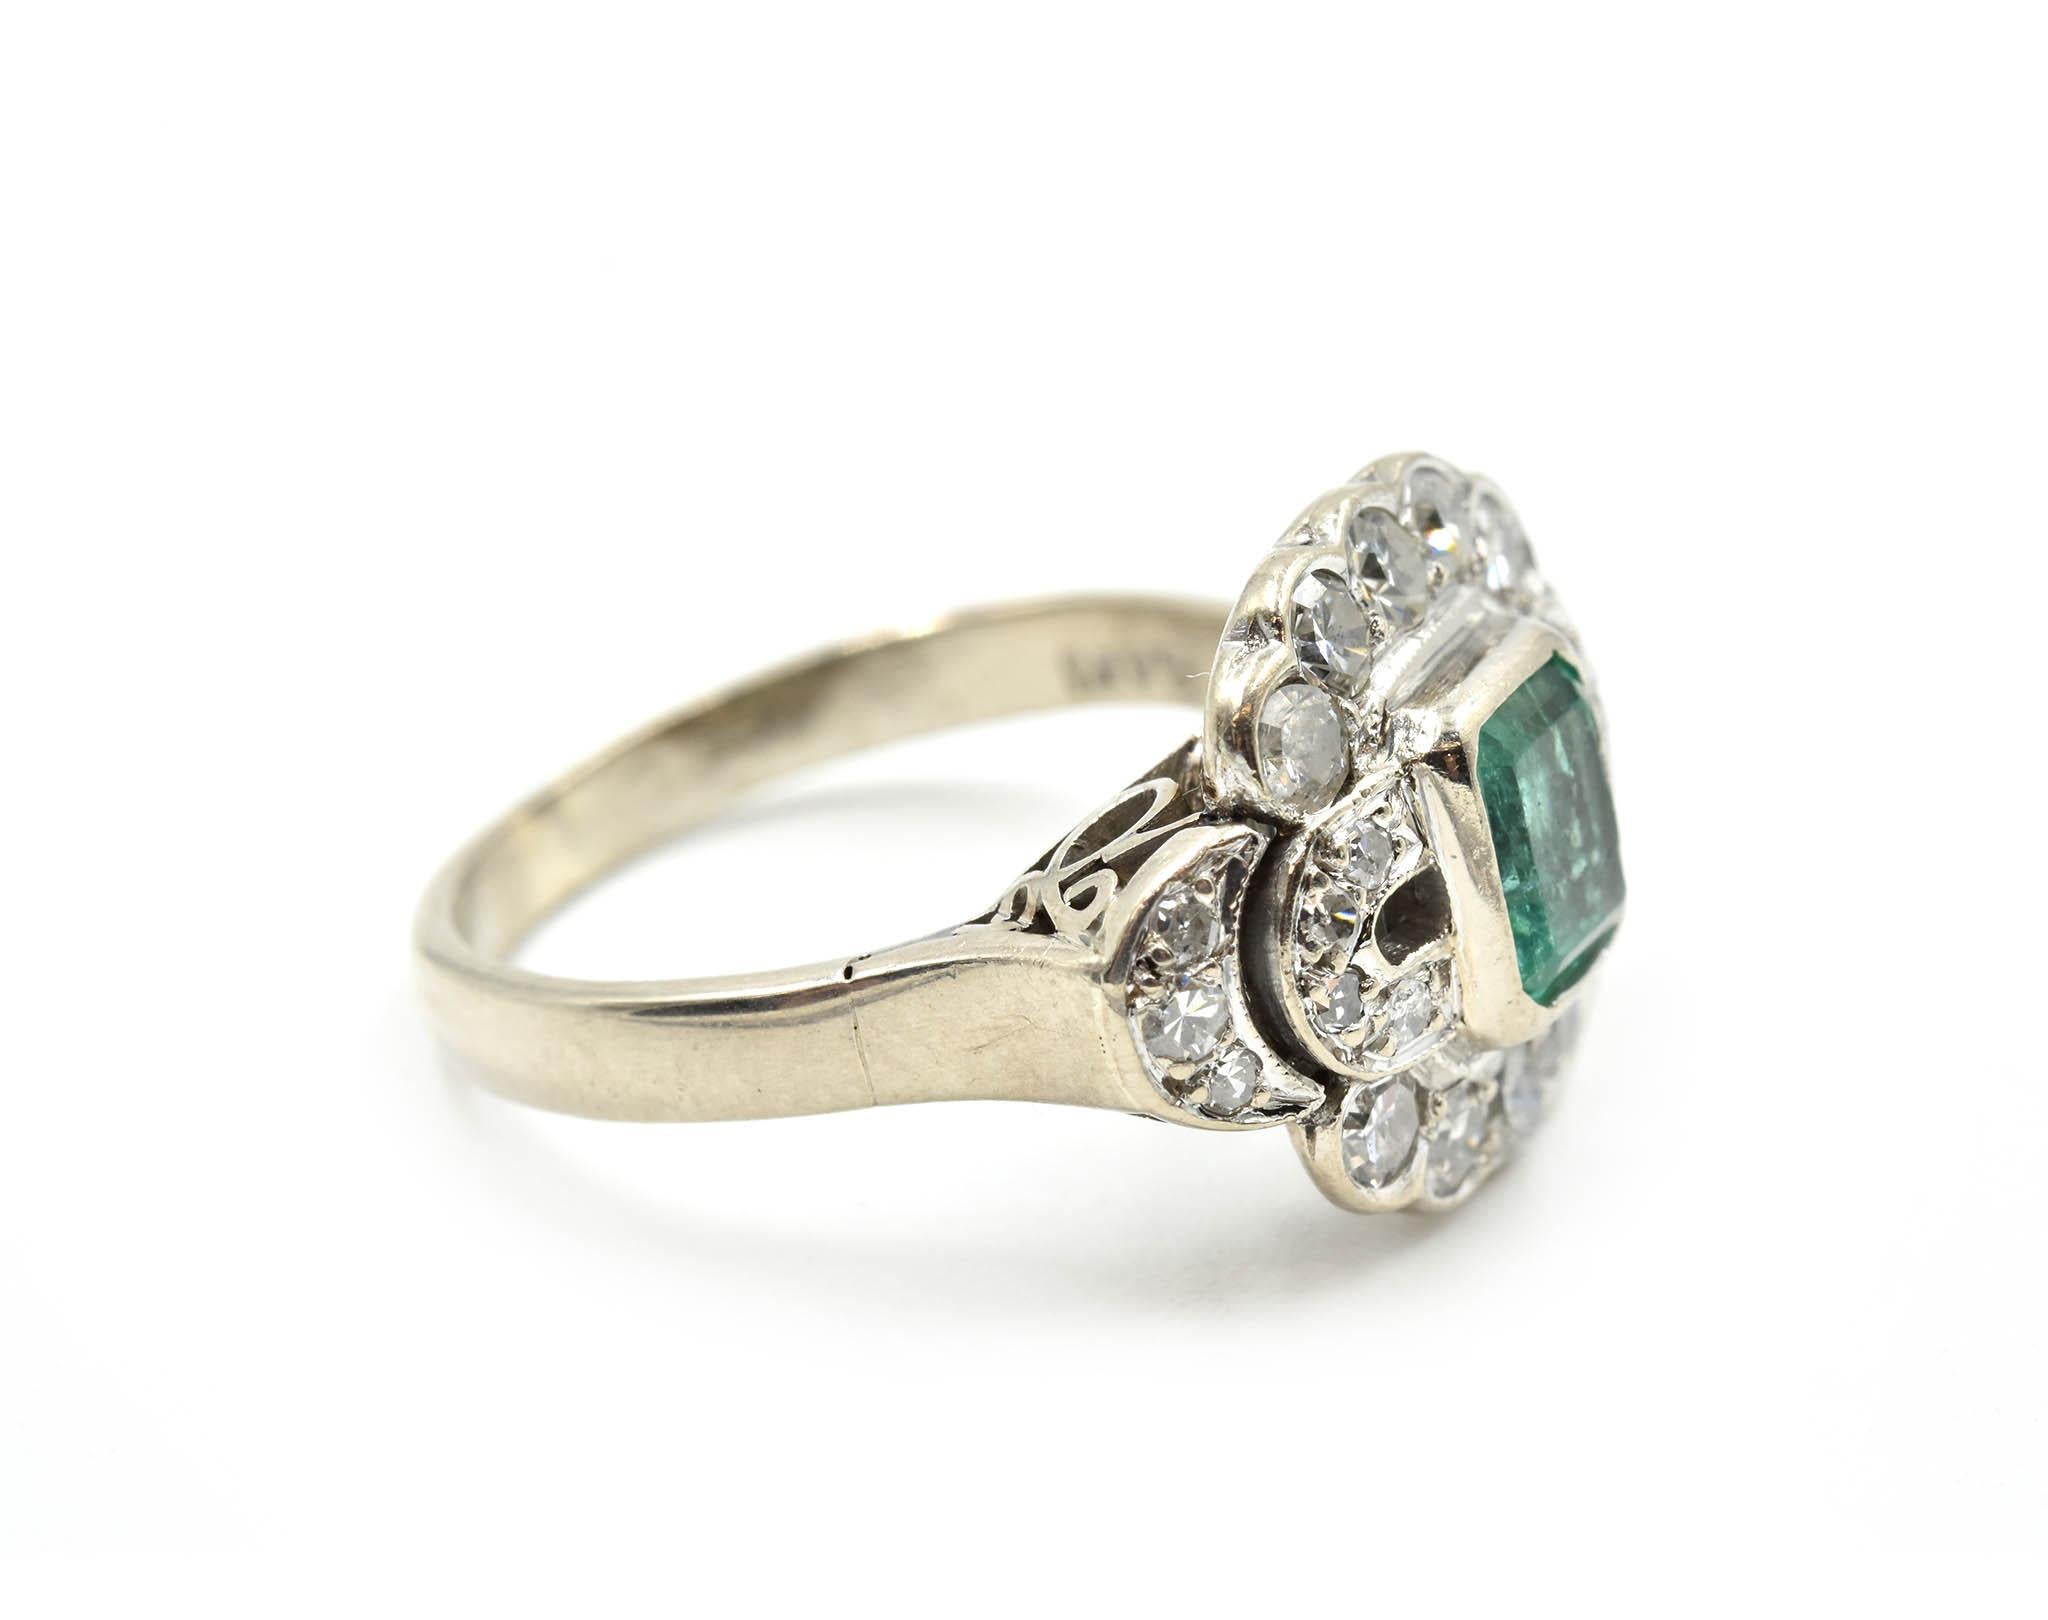 Designer: custom design
Material: 14k white gold
Emerald: emerald cut 0.50 carat weight emerald
Diamonds: 24 round brilliant cuts = 0.64 carat weight
Dimensions: ring top is a 1/2-inch long and a 5/8 inch wide
Ring Size: 7 (please allow two extra